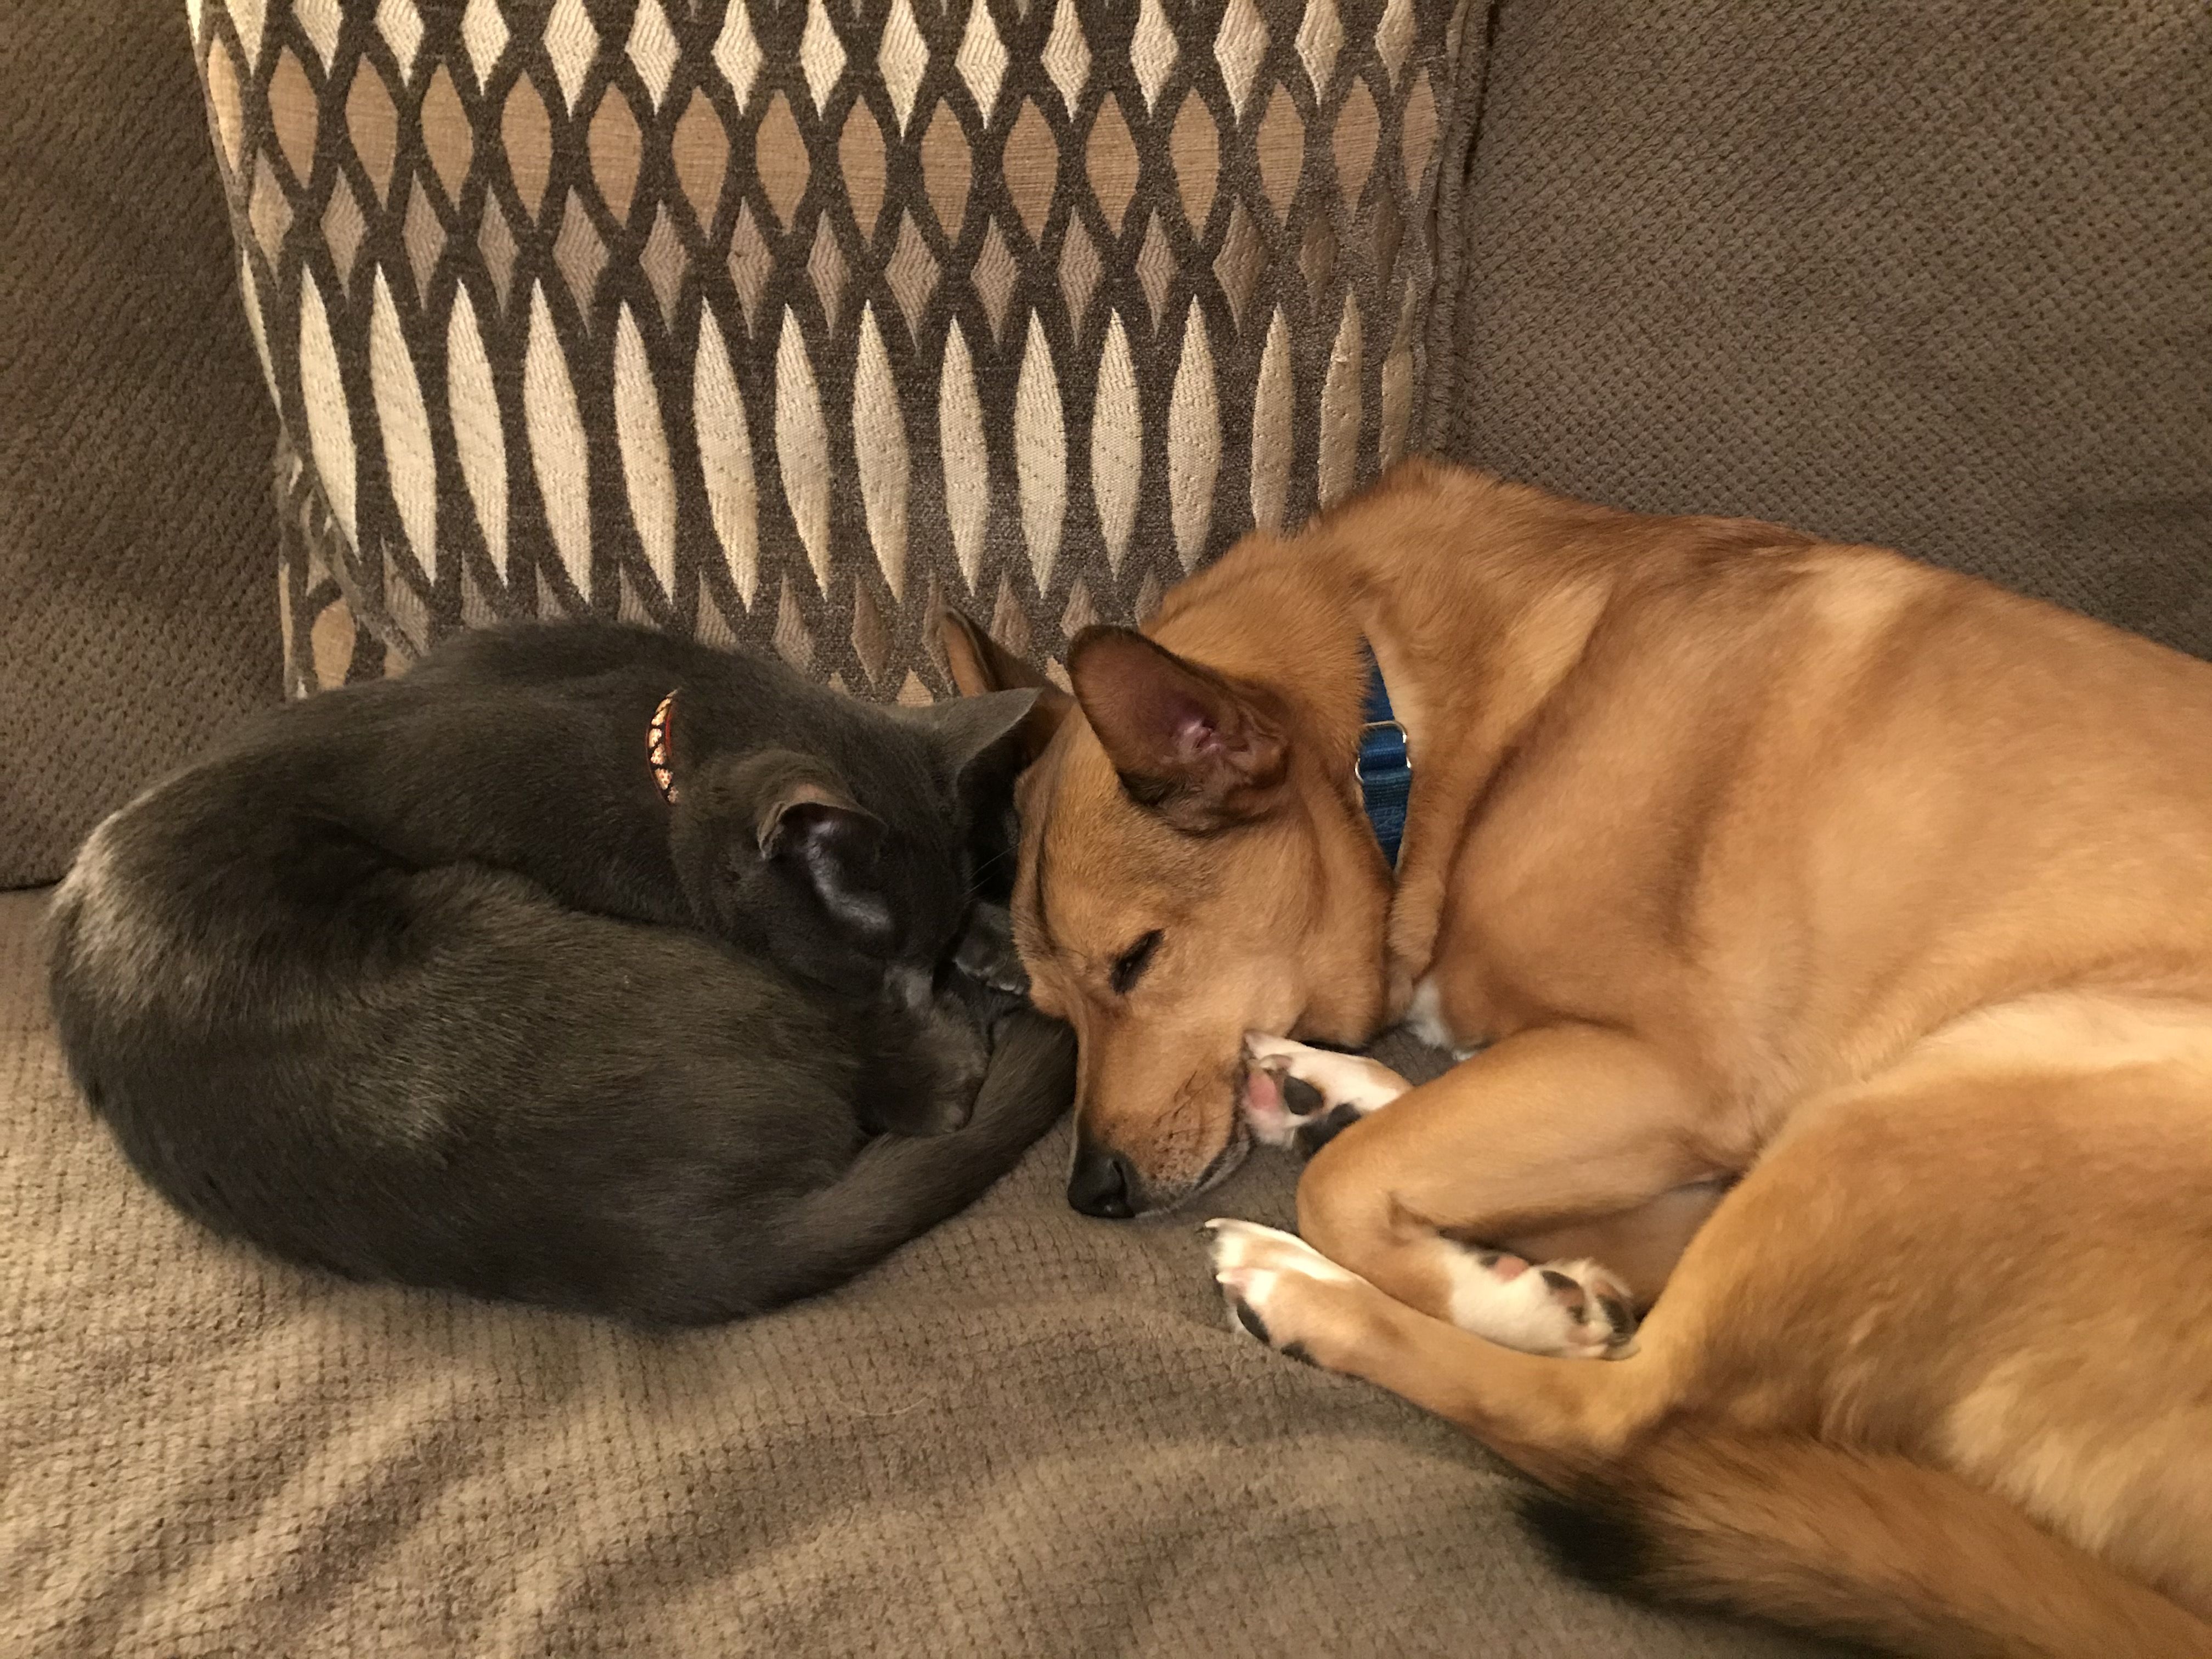 A gray cat and brown dog sleeping next to each other on a couch.